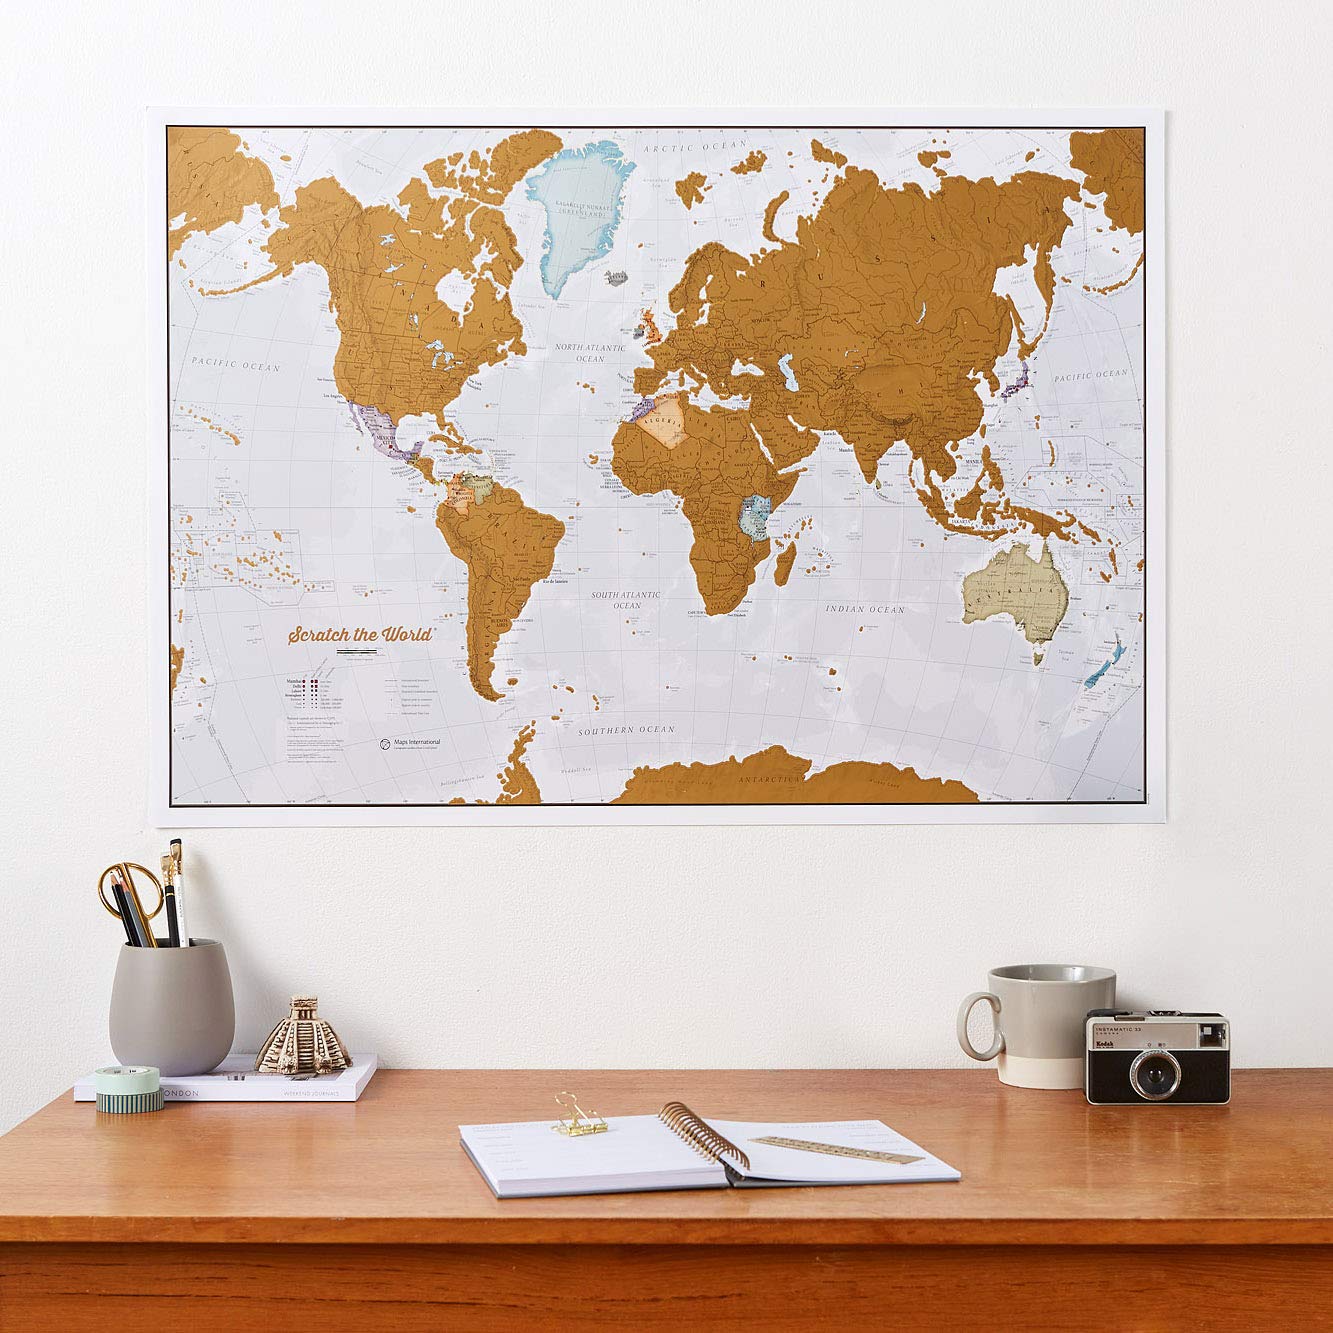 Maps International Scratch The World A Travel Map - Scratch Off World Map Poster - X-Large 23 x 33 - Maps International - 50 Years of Map Making - 